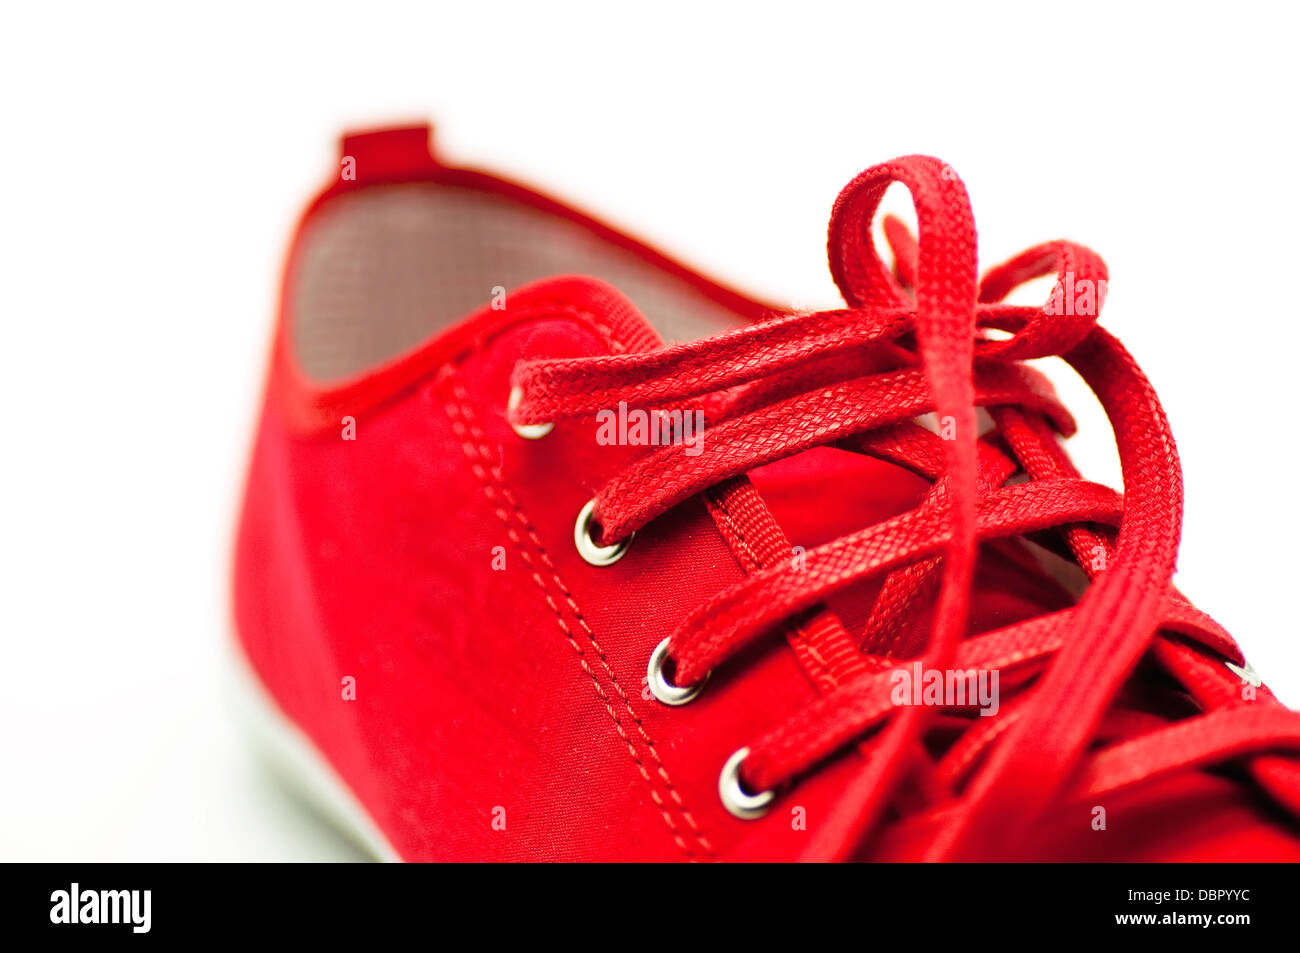 Red shoes Stock Photo